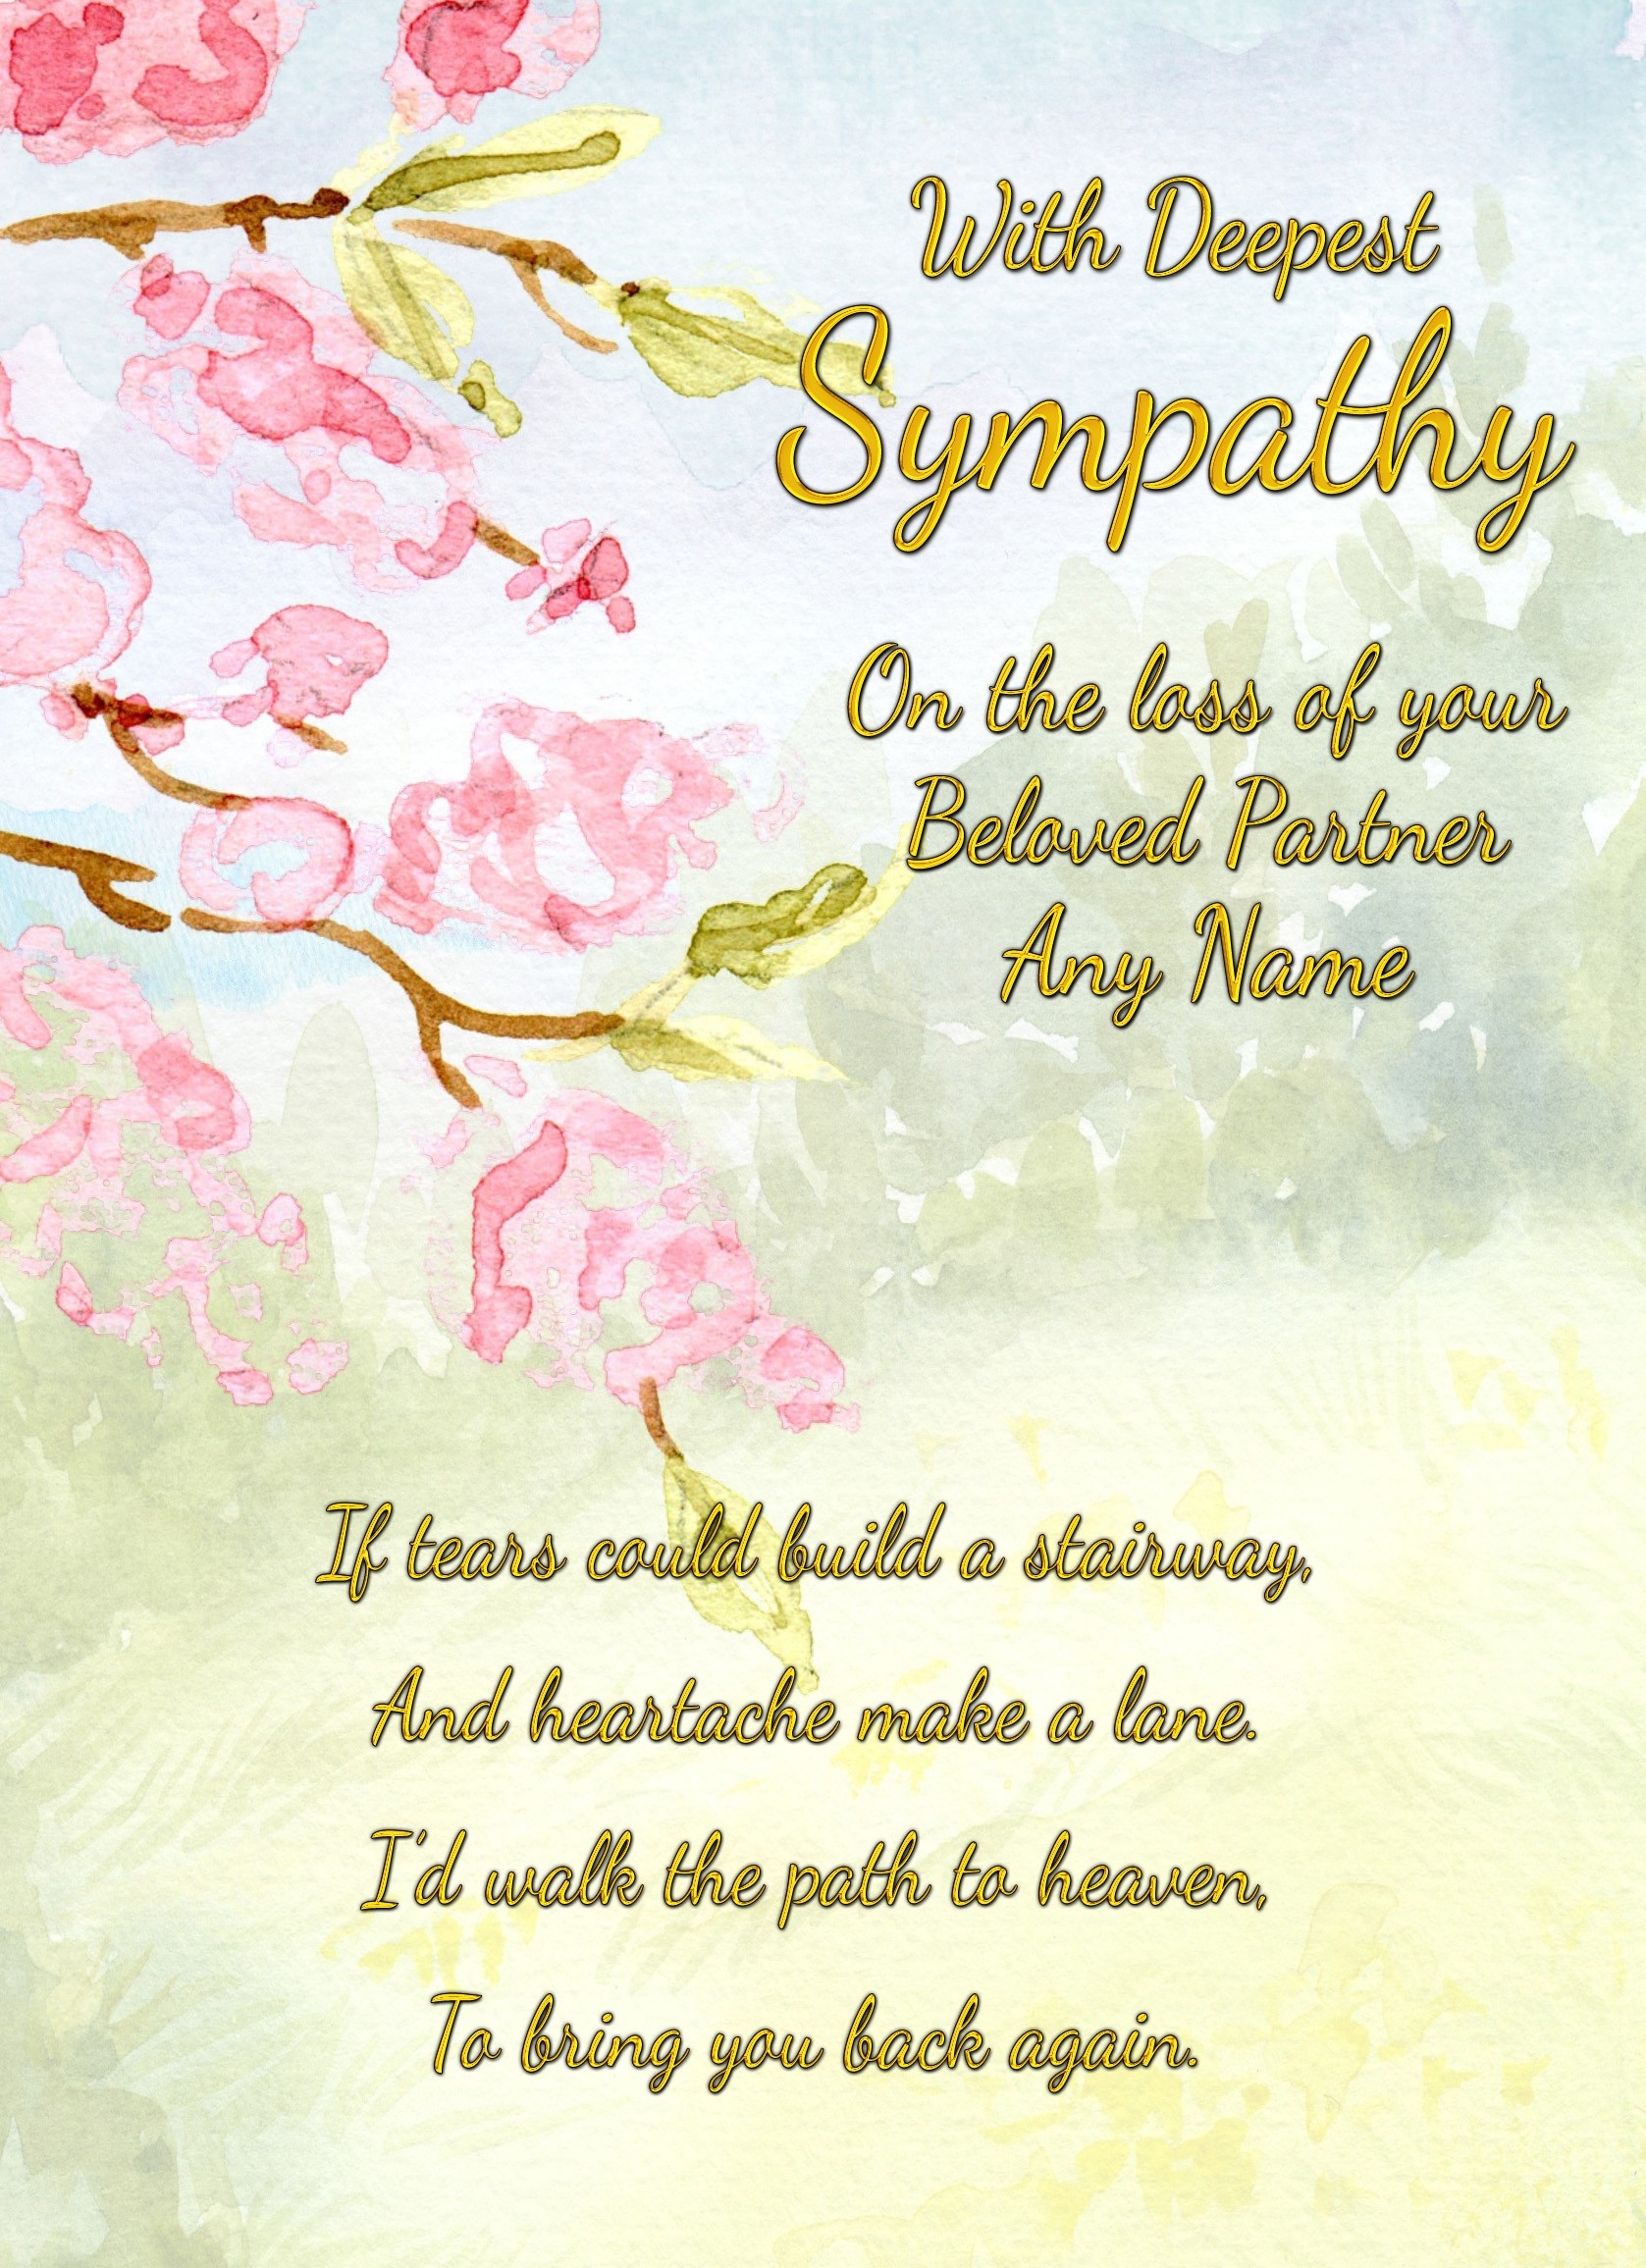 Personalised Sympathy Bereavement Card (With Deepest Sympathy, Beloved Partner)